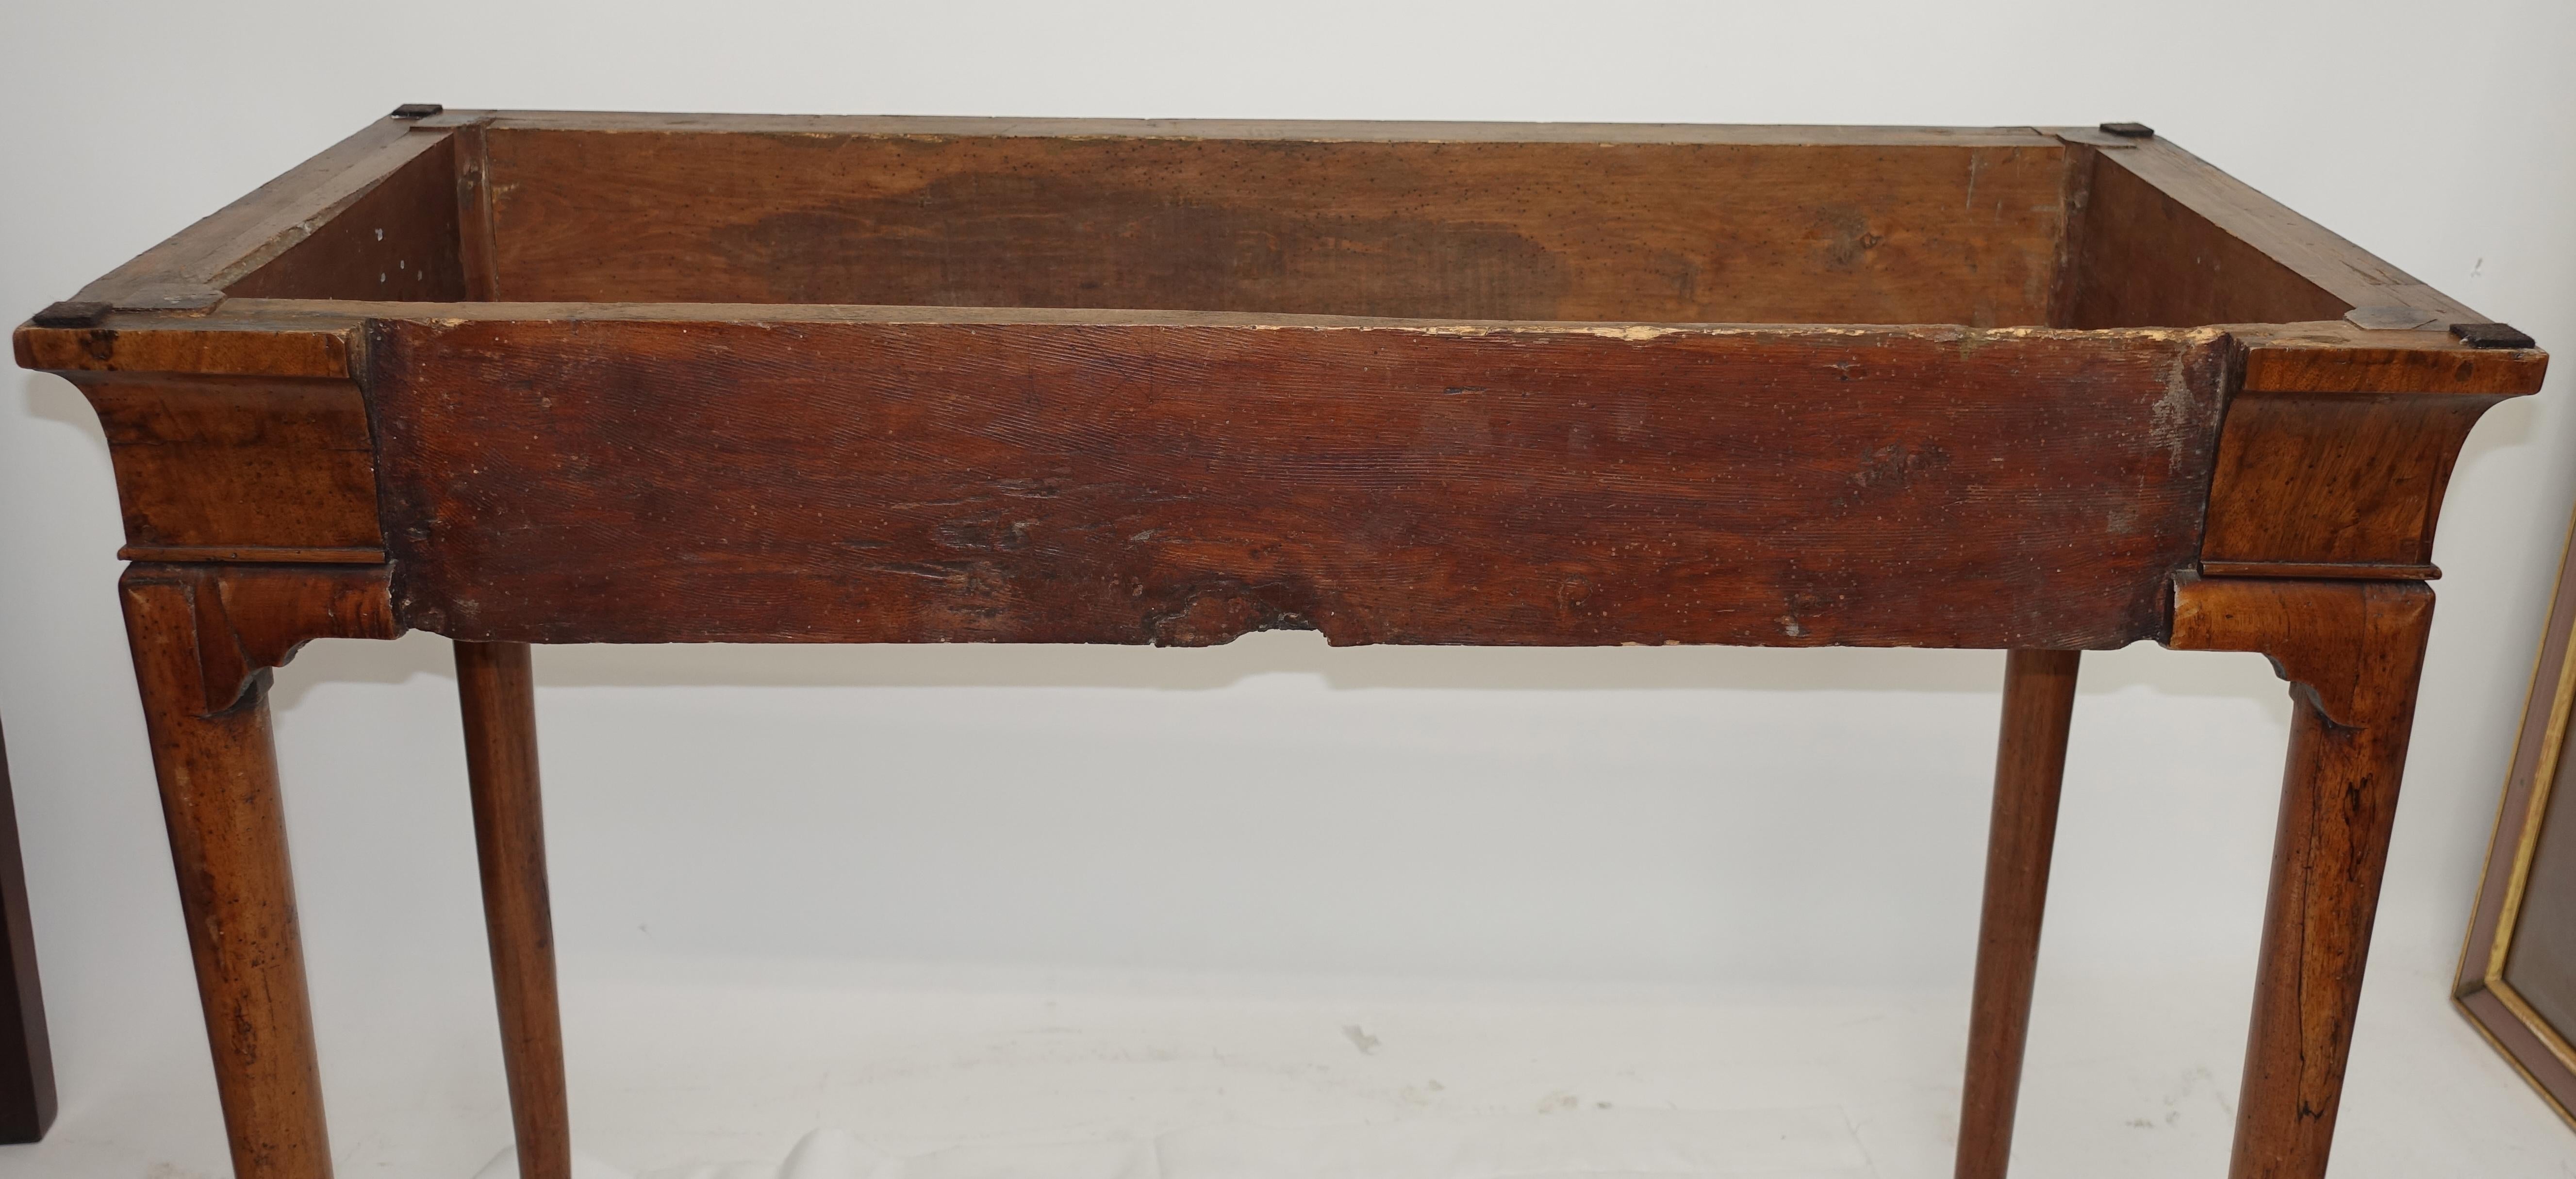 George II Period Walnut Pier / Console Table with Marble Top For Sale 5